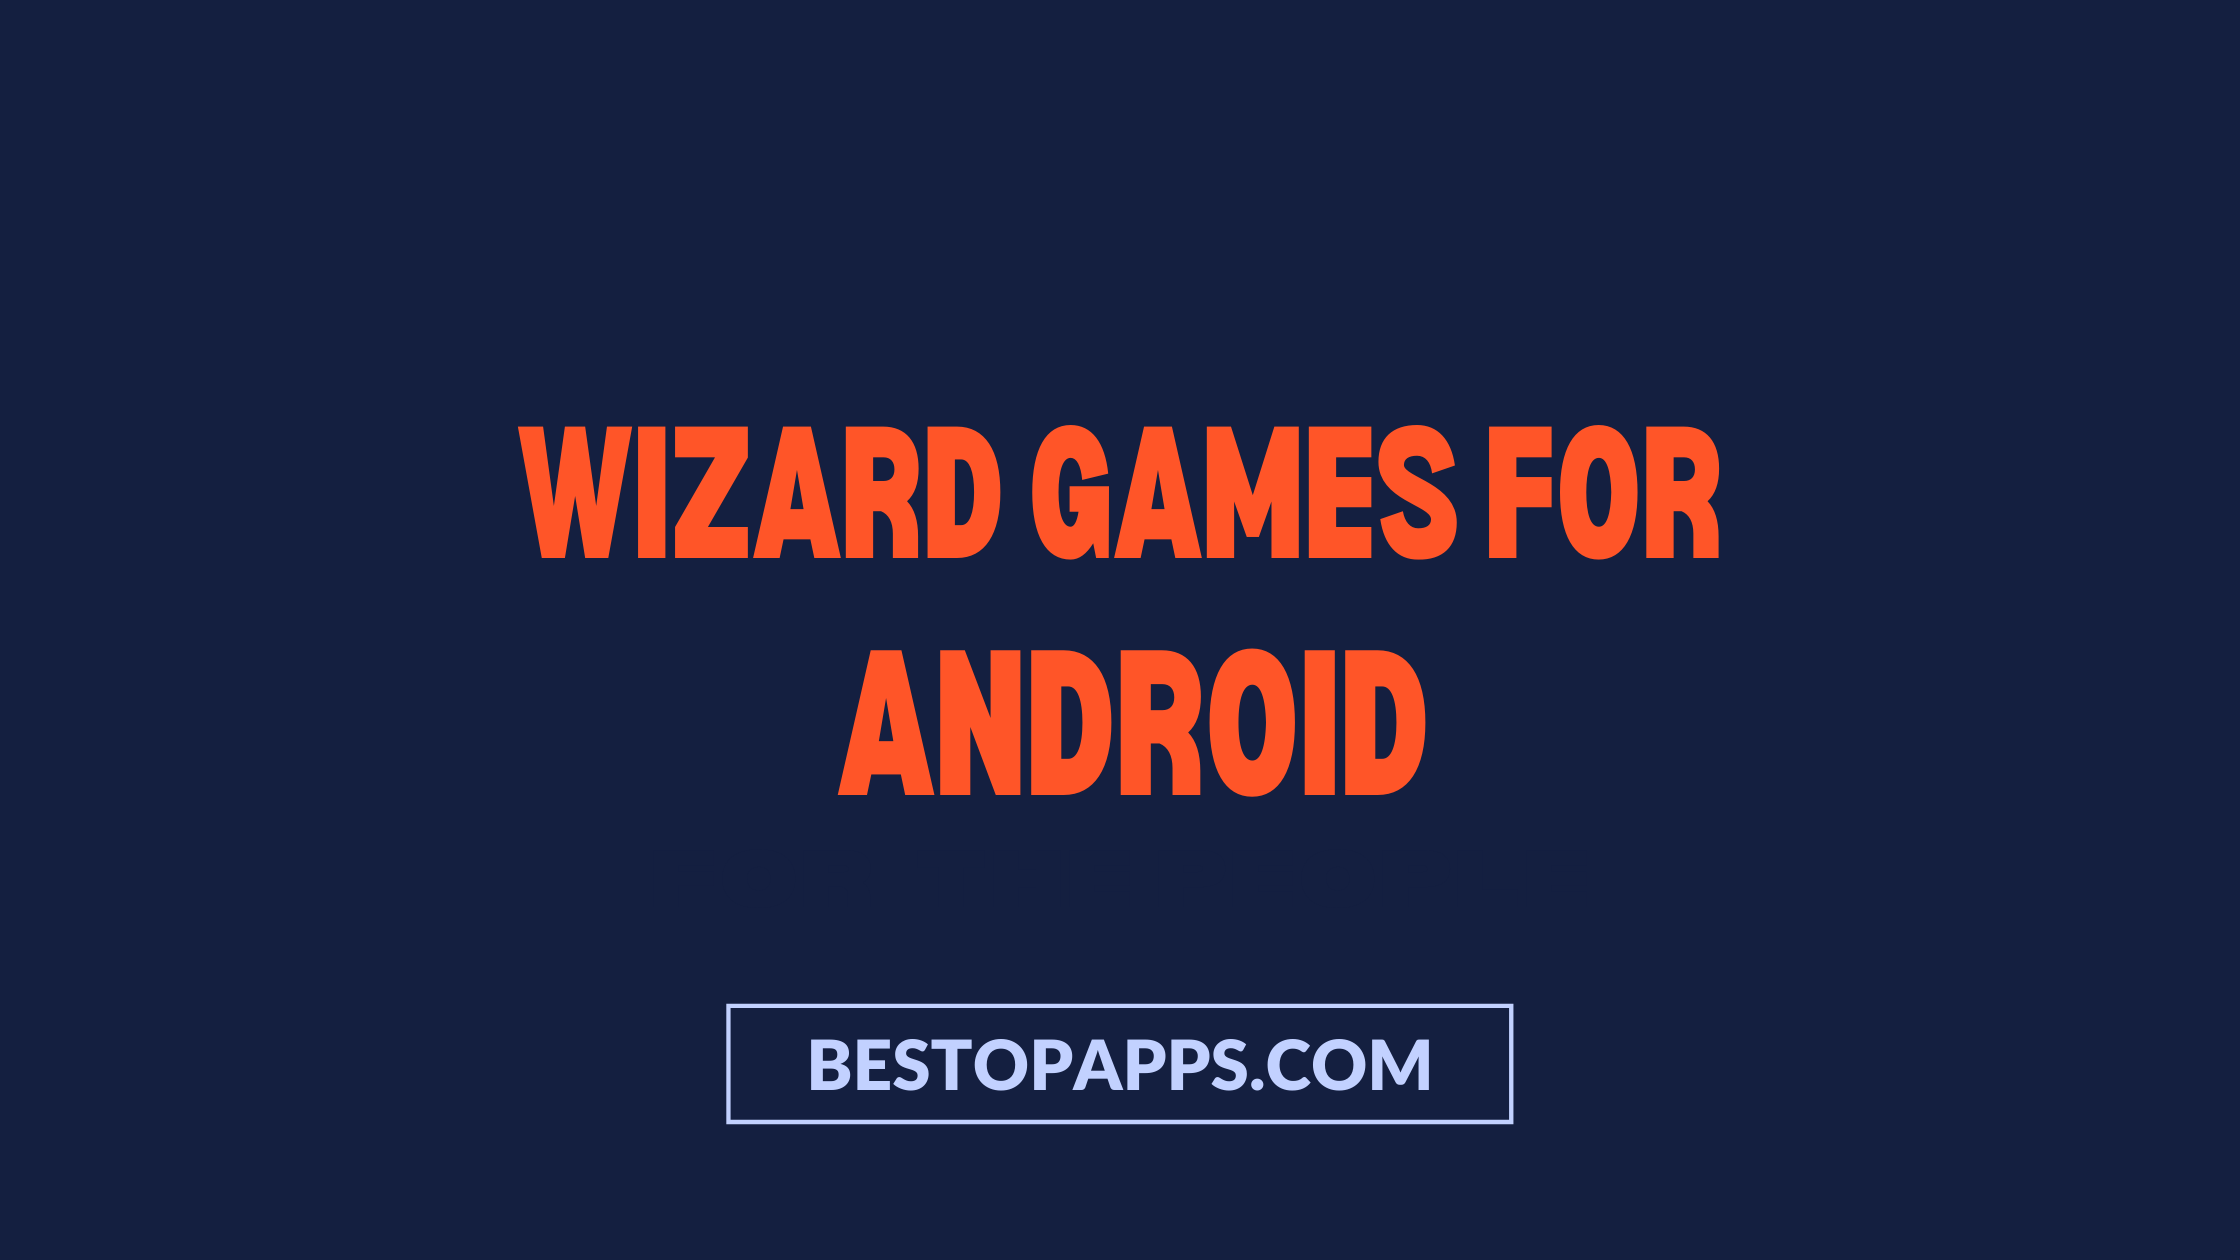 Wizard Games for Android